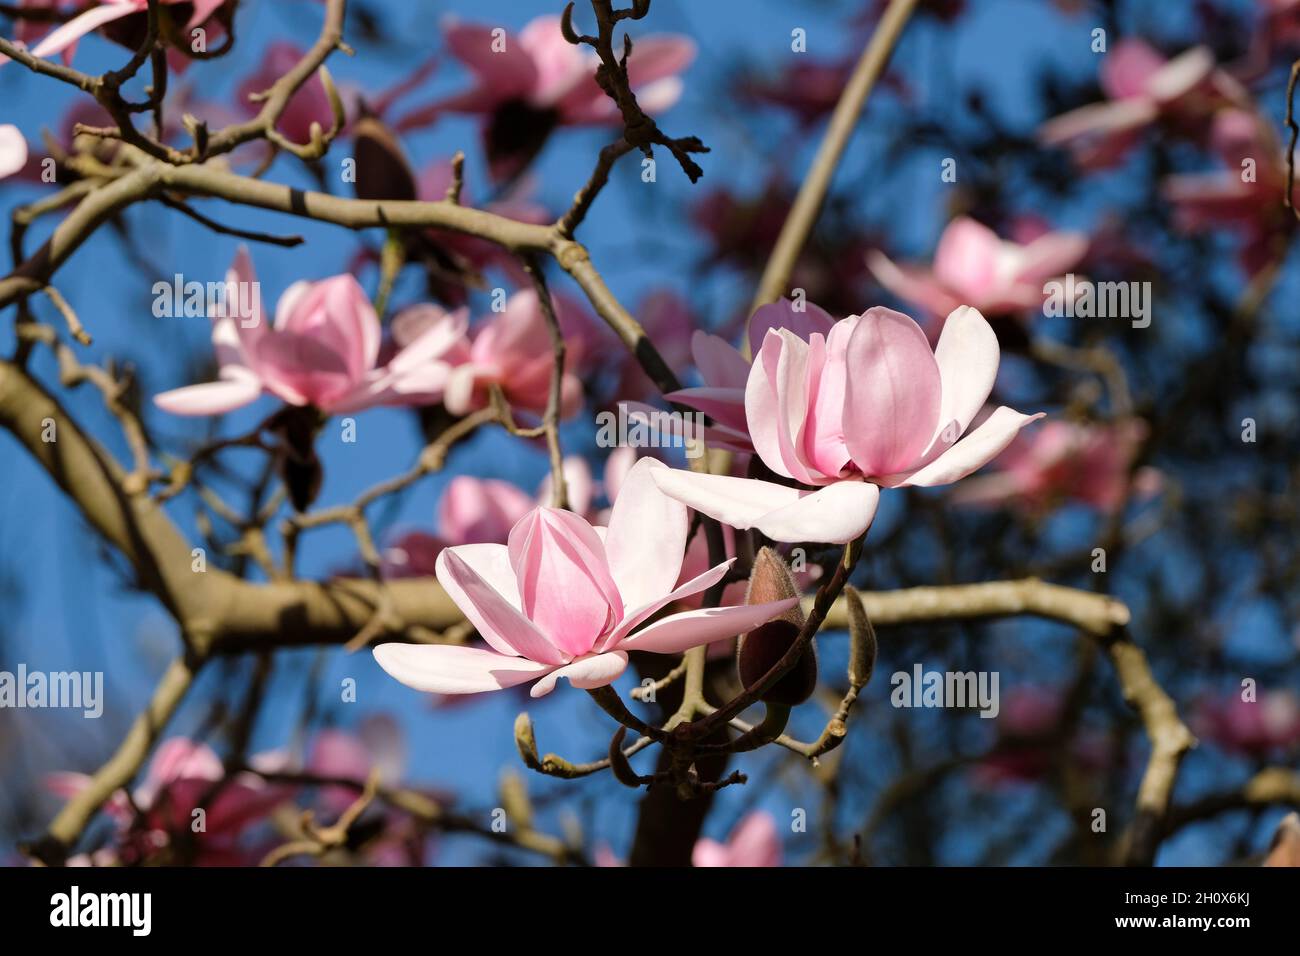 Magnolia campbellii, or Campbell's magnolia. Pink flowers in late winter/early spring Stock Photo